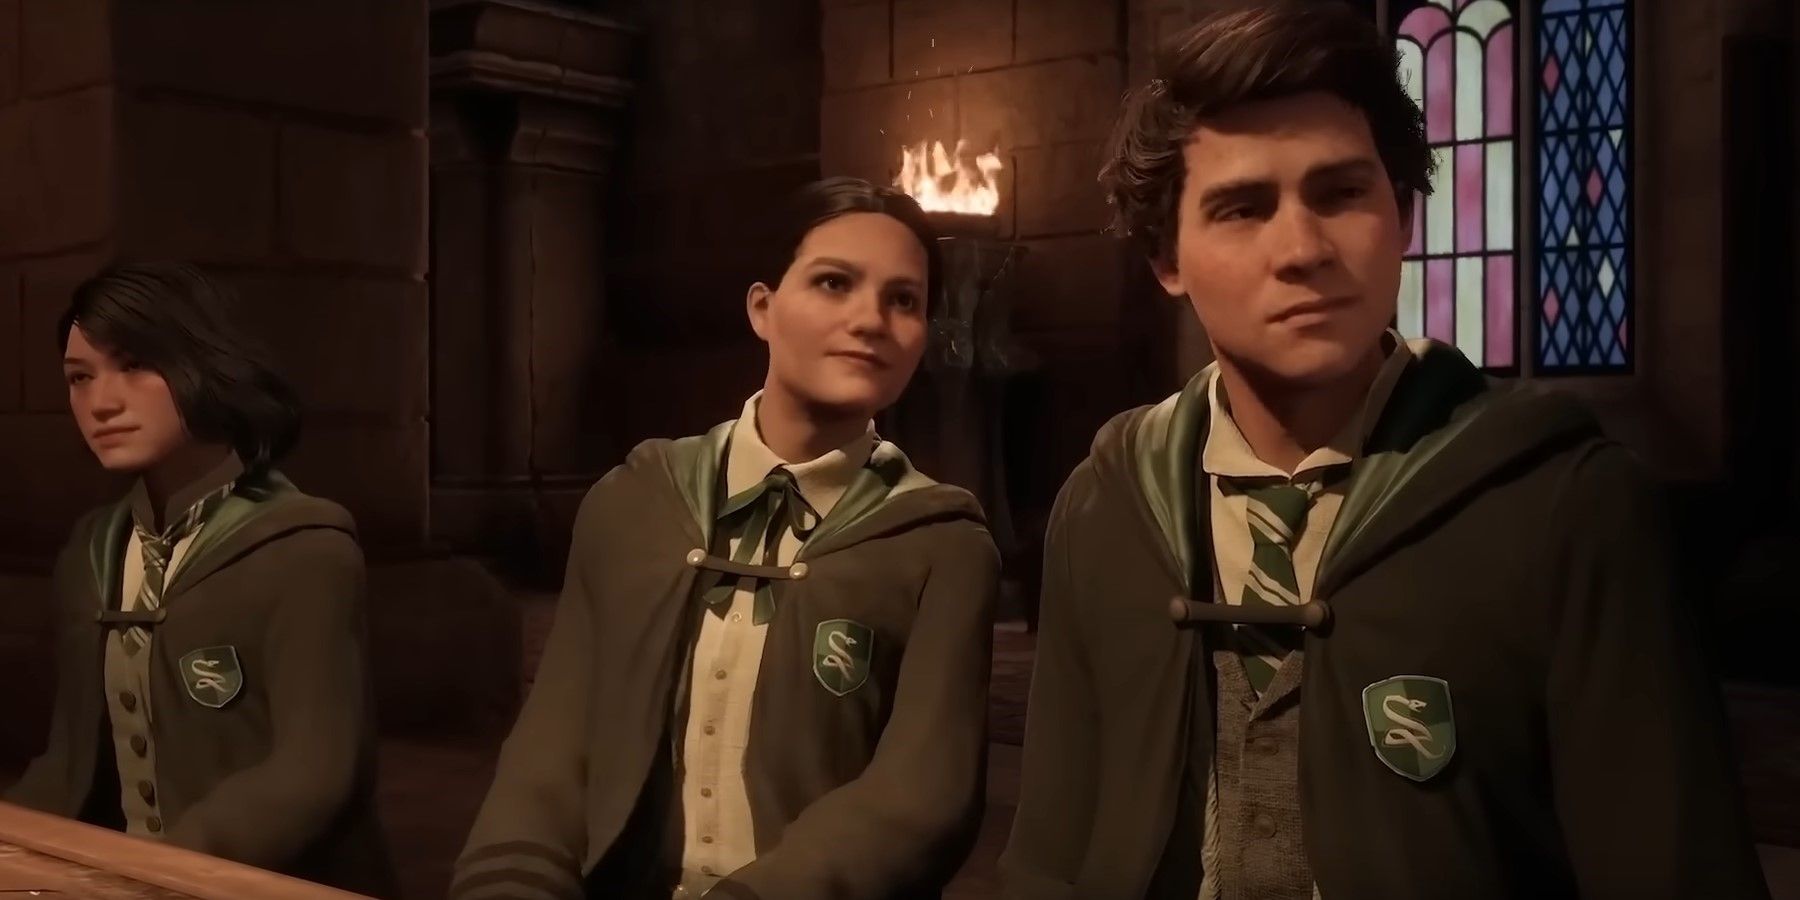 Hogwarts Legacy, the new Harry Potter game, is already top of Steam